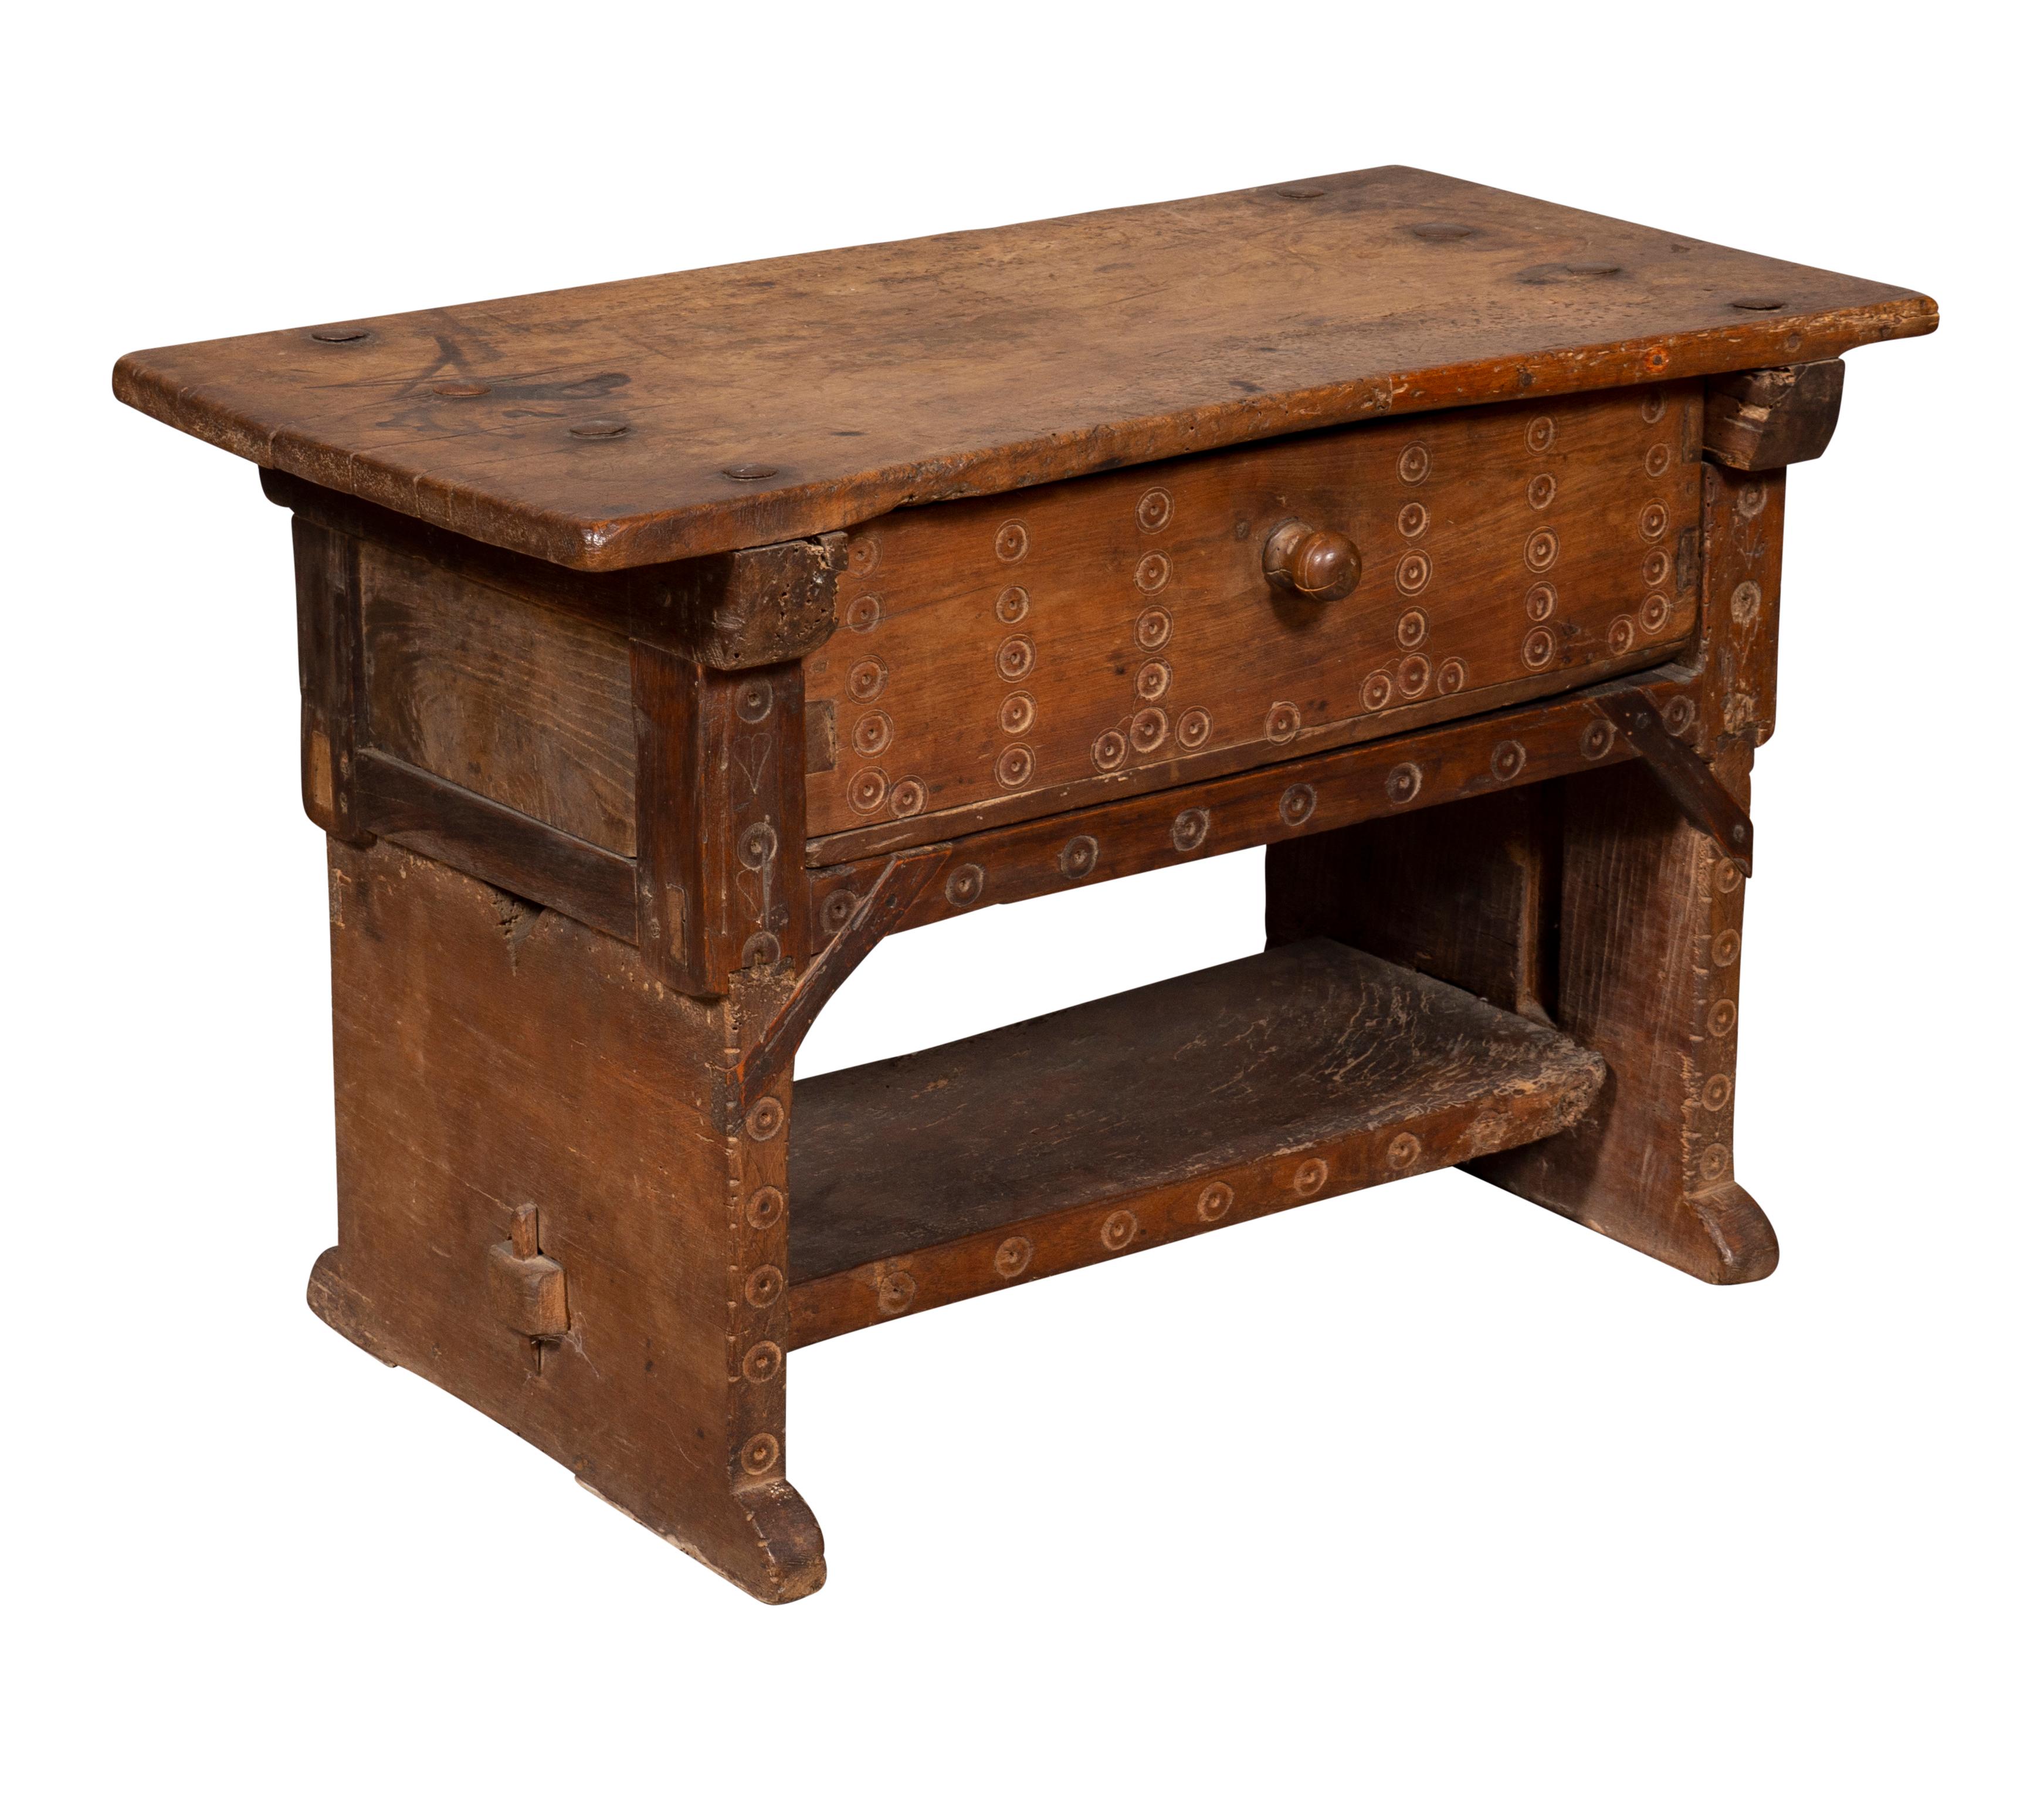 Late 17th Century Early Spanish Baroque Walnut Low Table